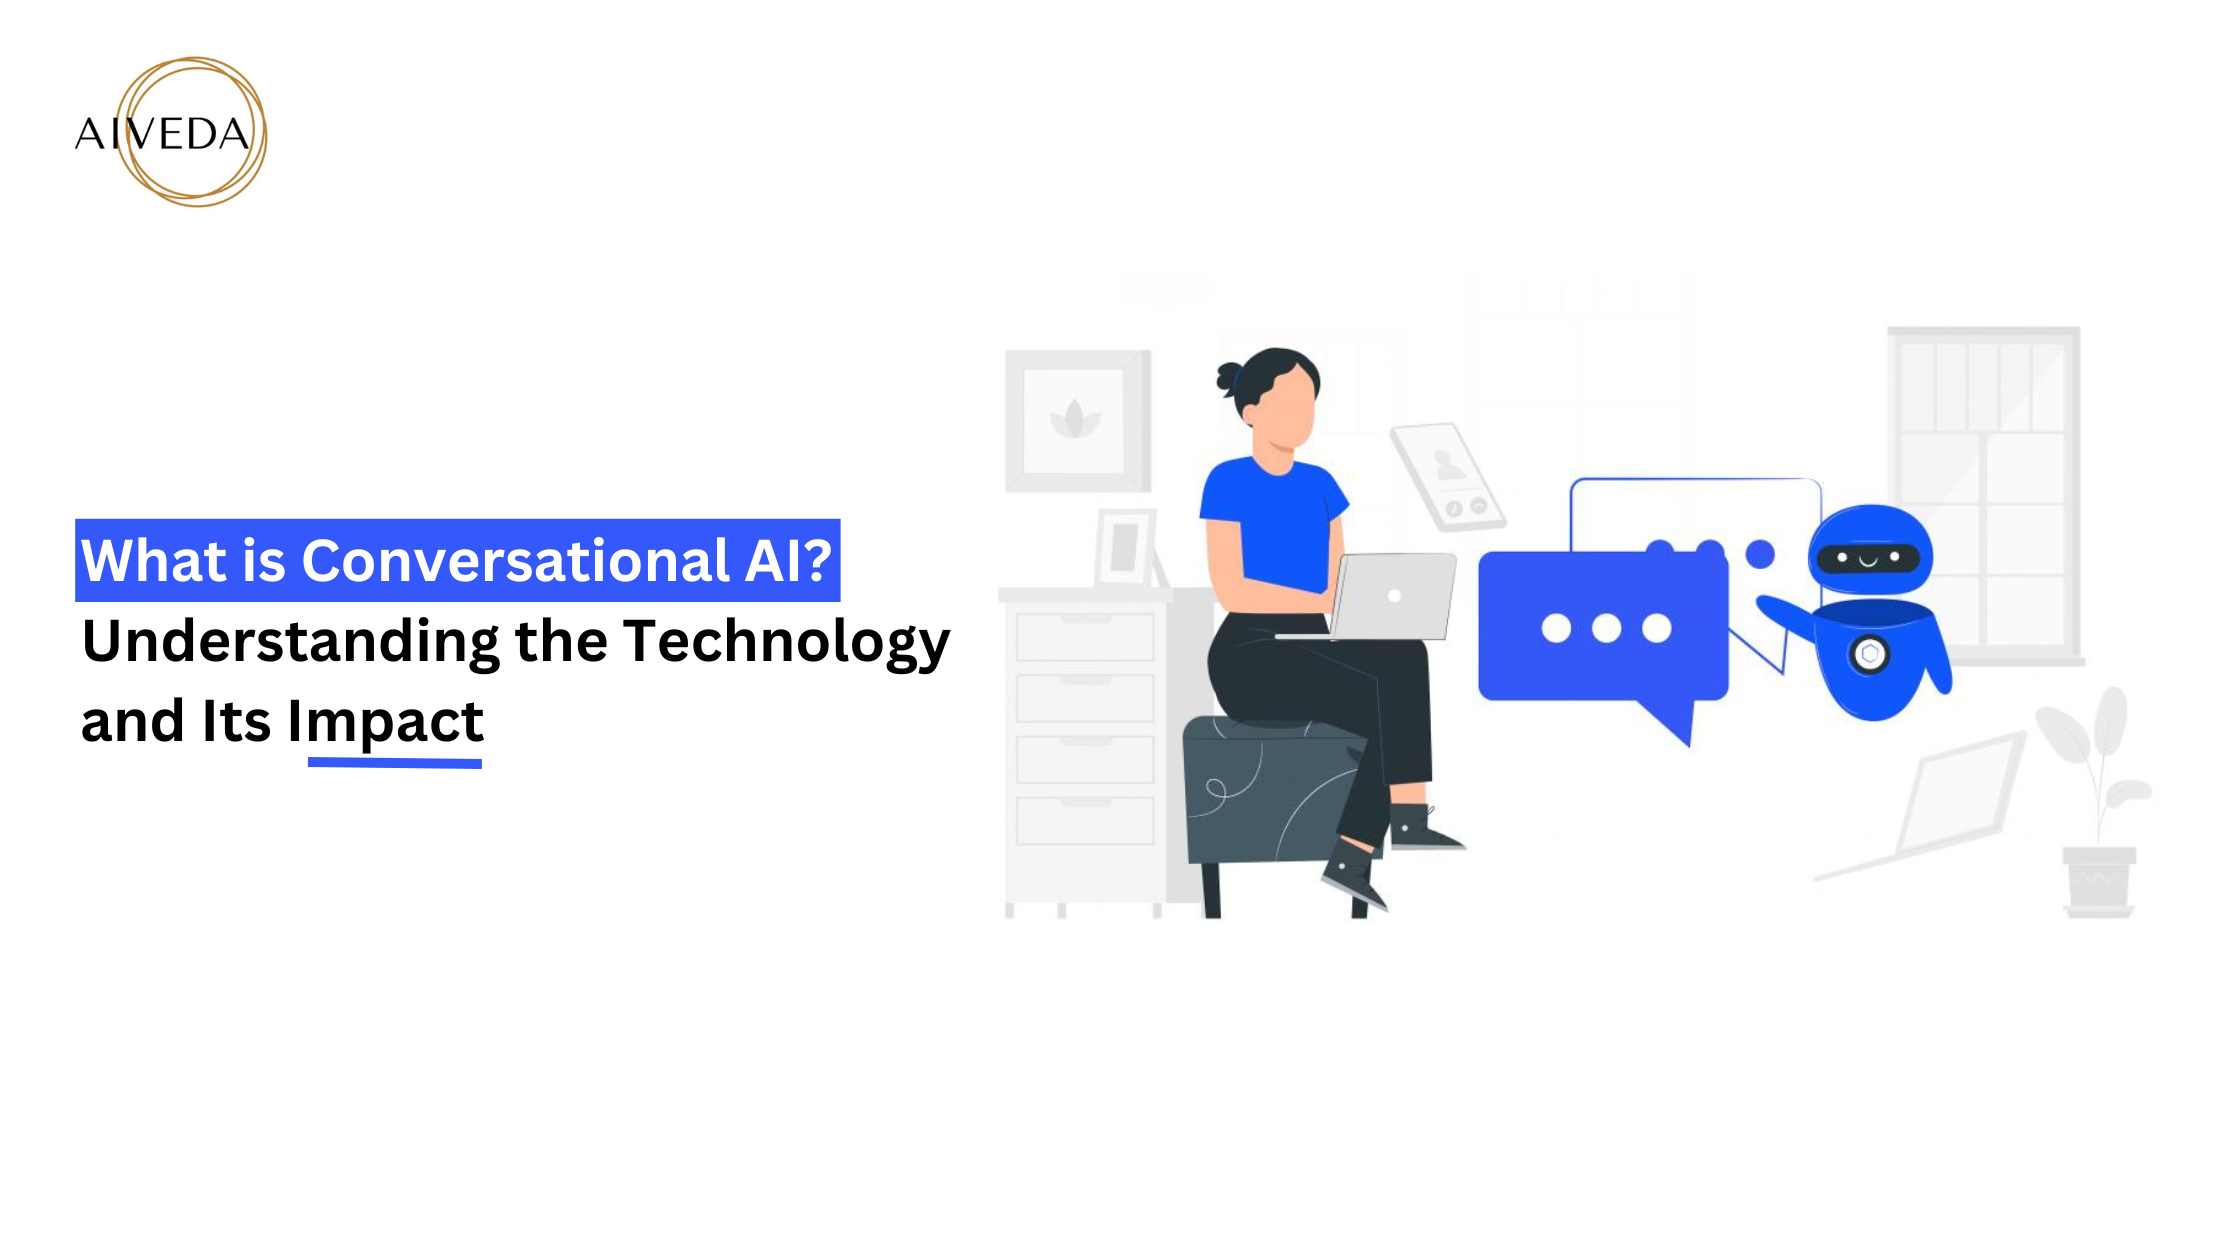 What is Conversational AI? Understanding the Technology and Its Impact